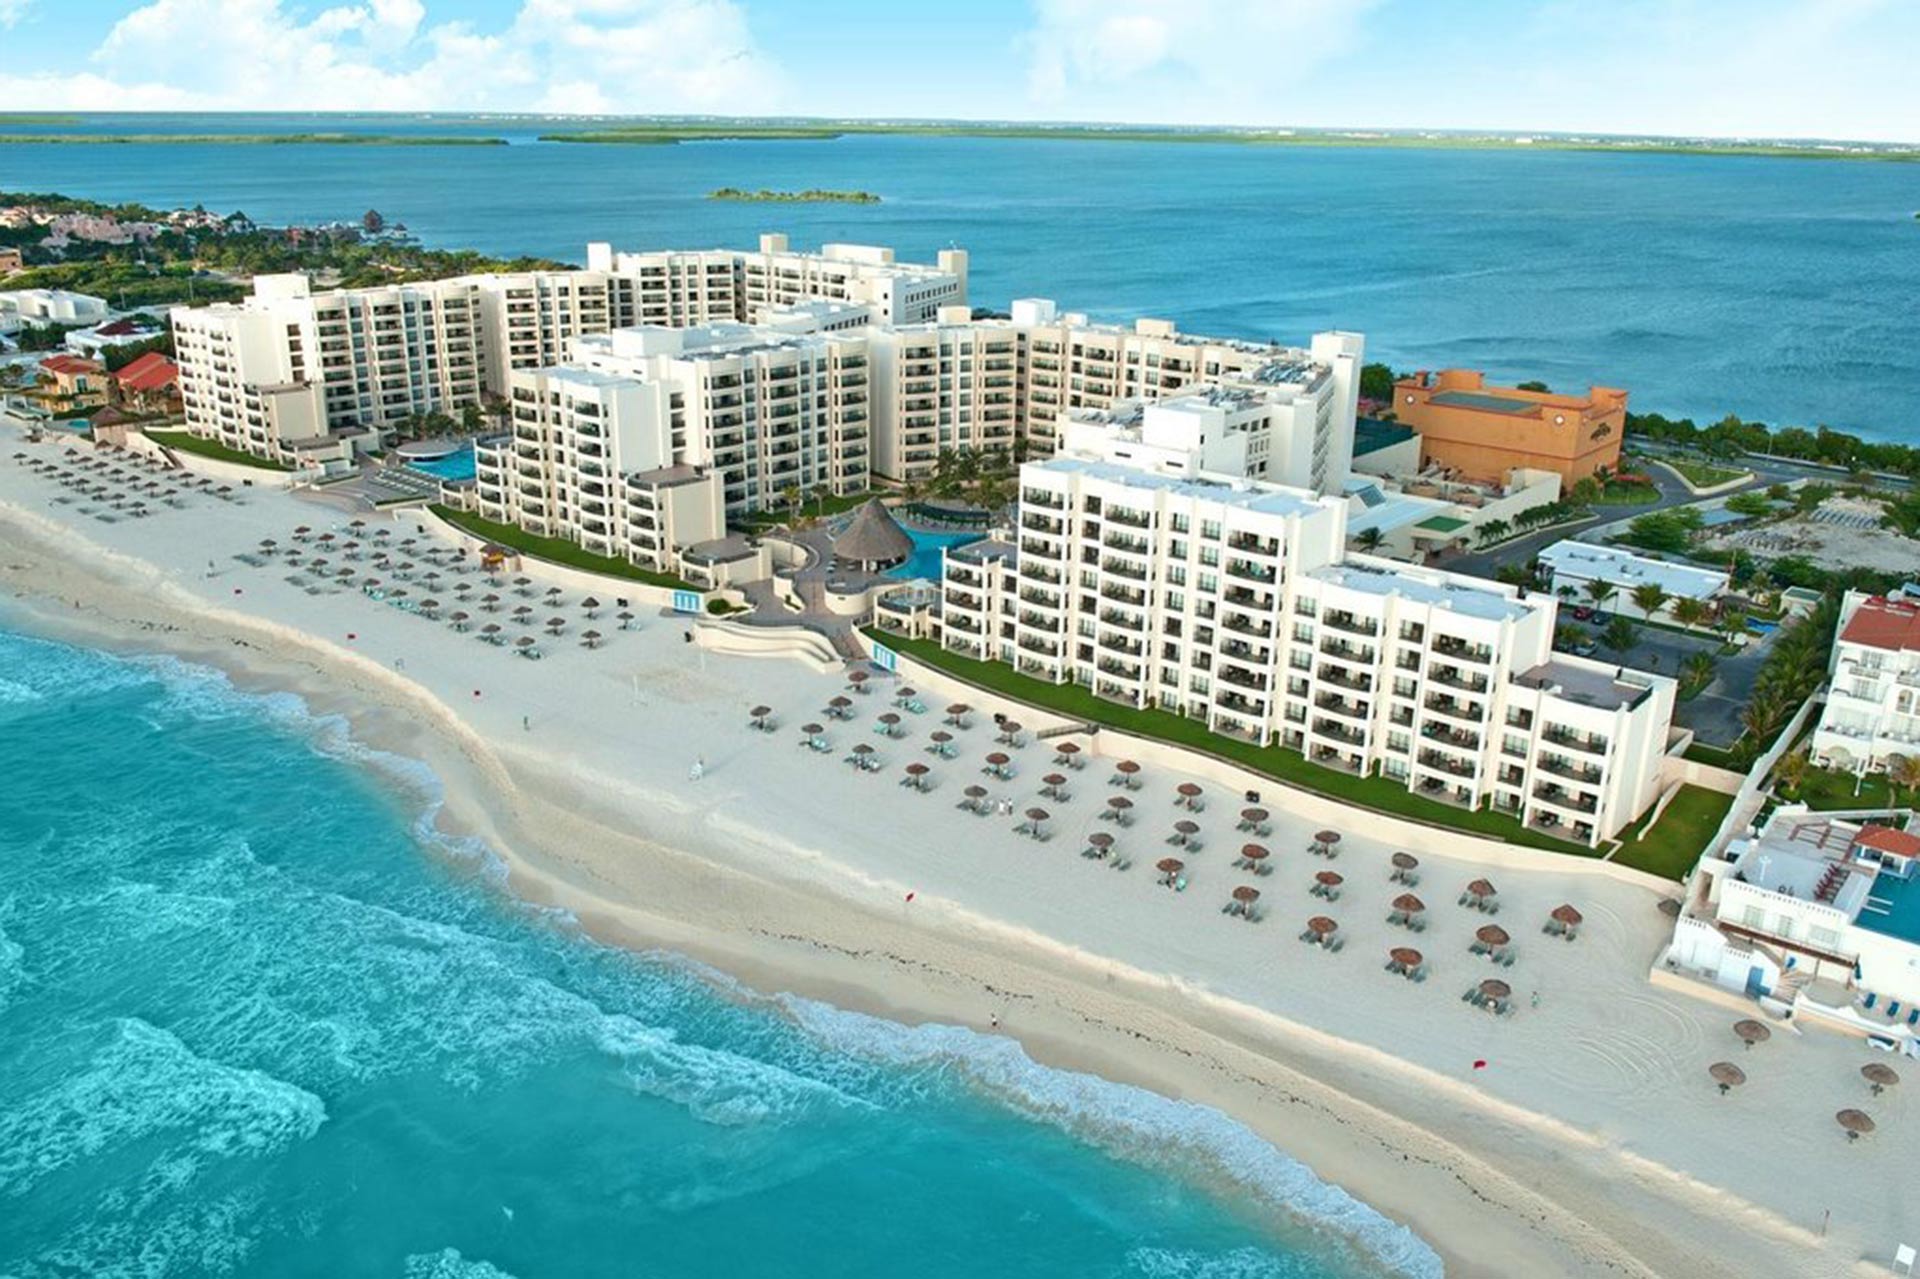 The Royal Sands in Cancun.